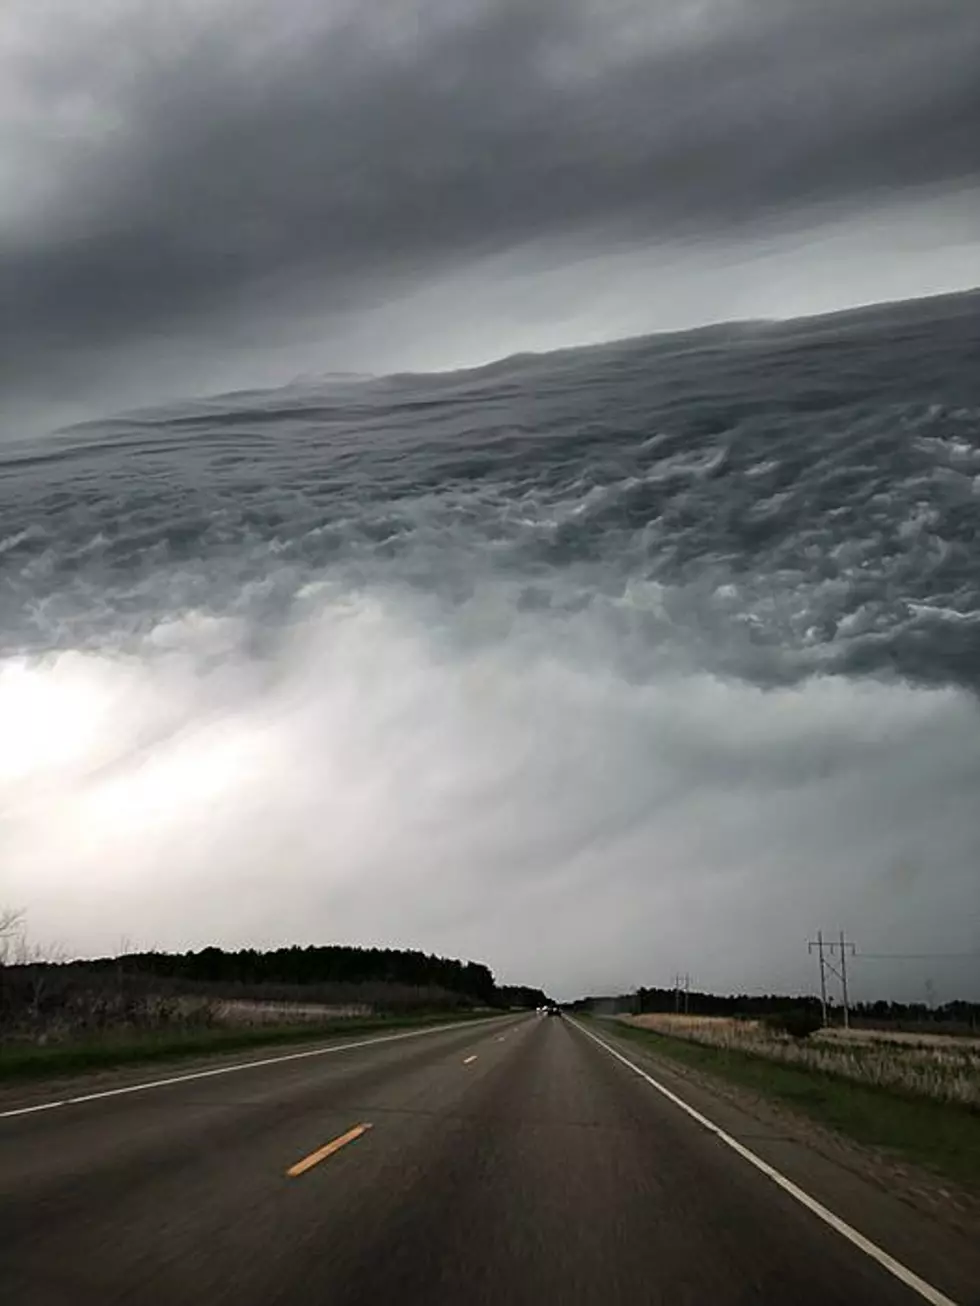 Rare Cloud Formation Called ‘End of the World Sky’ Captured over Minnesota